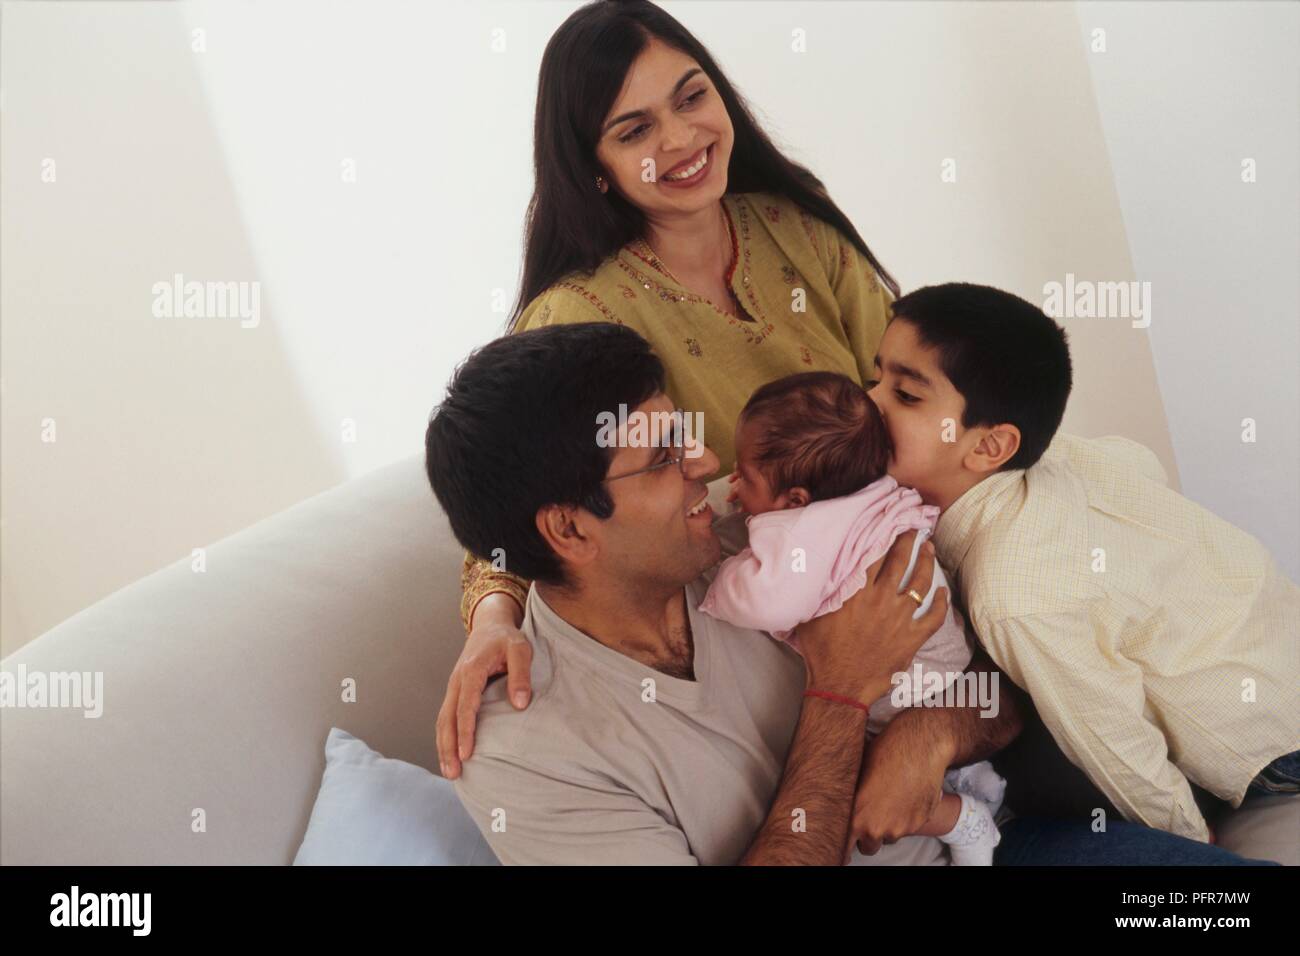 A man, woman, boy and baby girl together on sofa, man holding the baby and boy kissing the baby on the side of the head Stock Photo